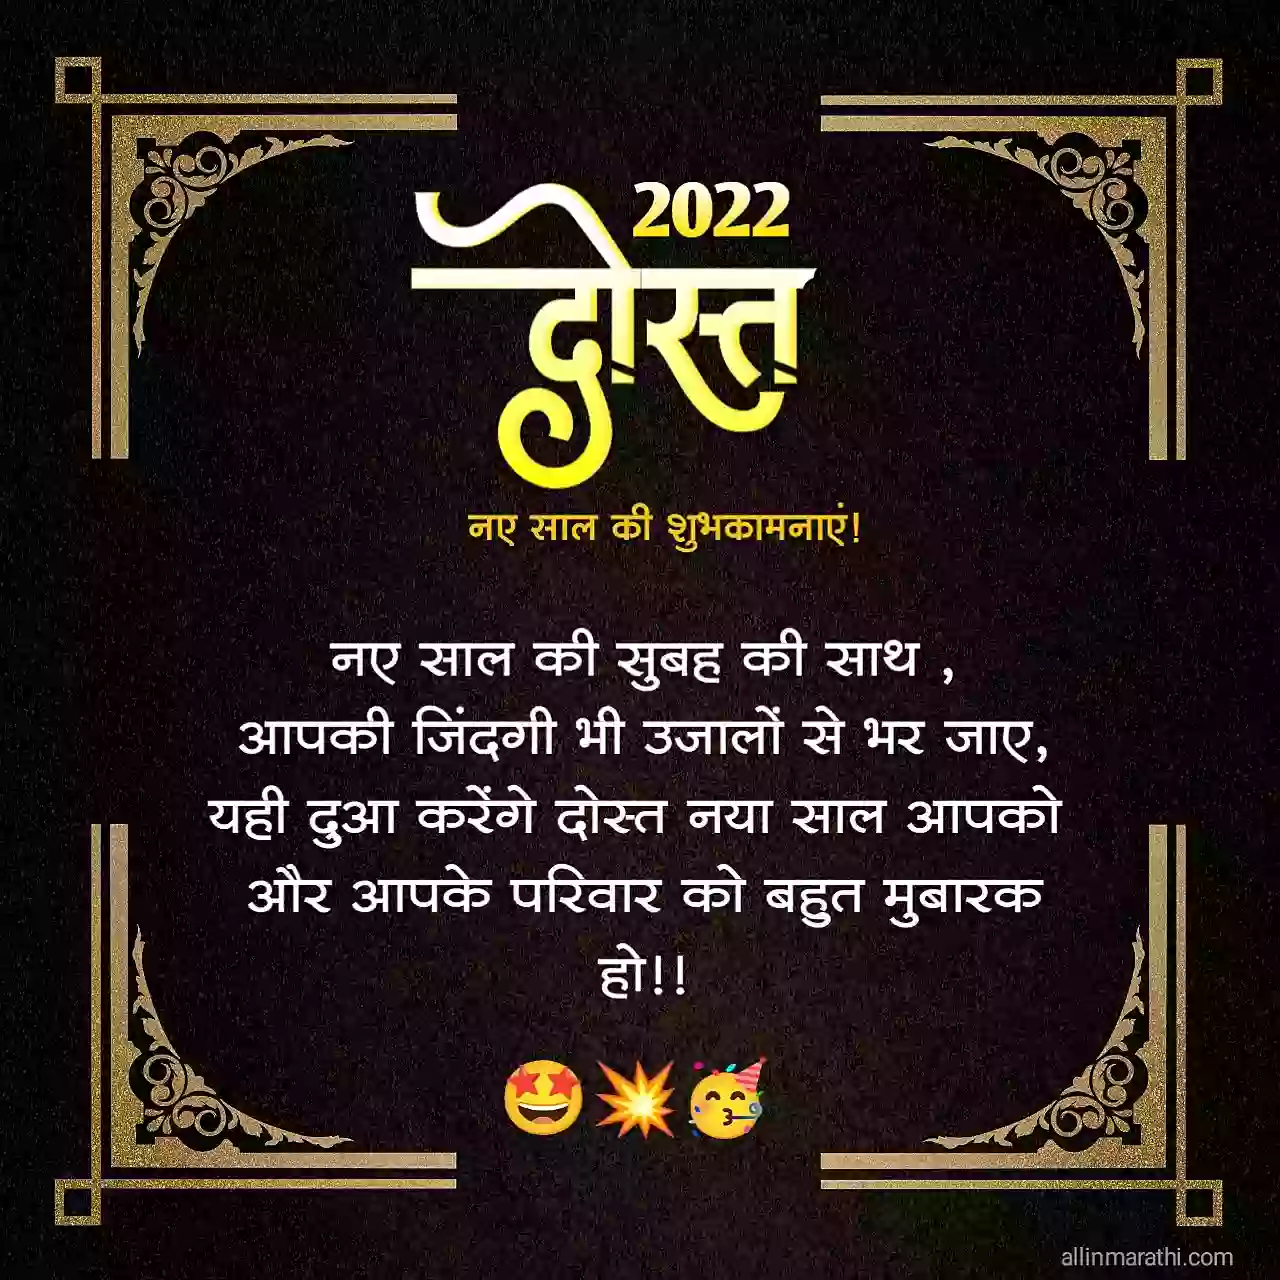 Happy new year images for friends in hindi